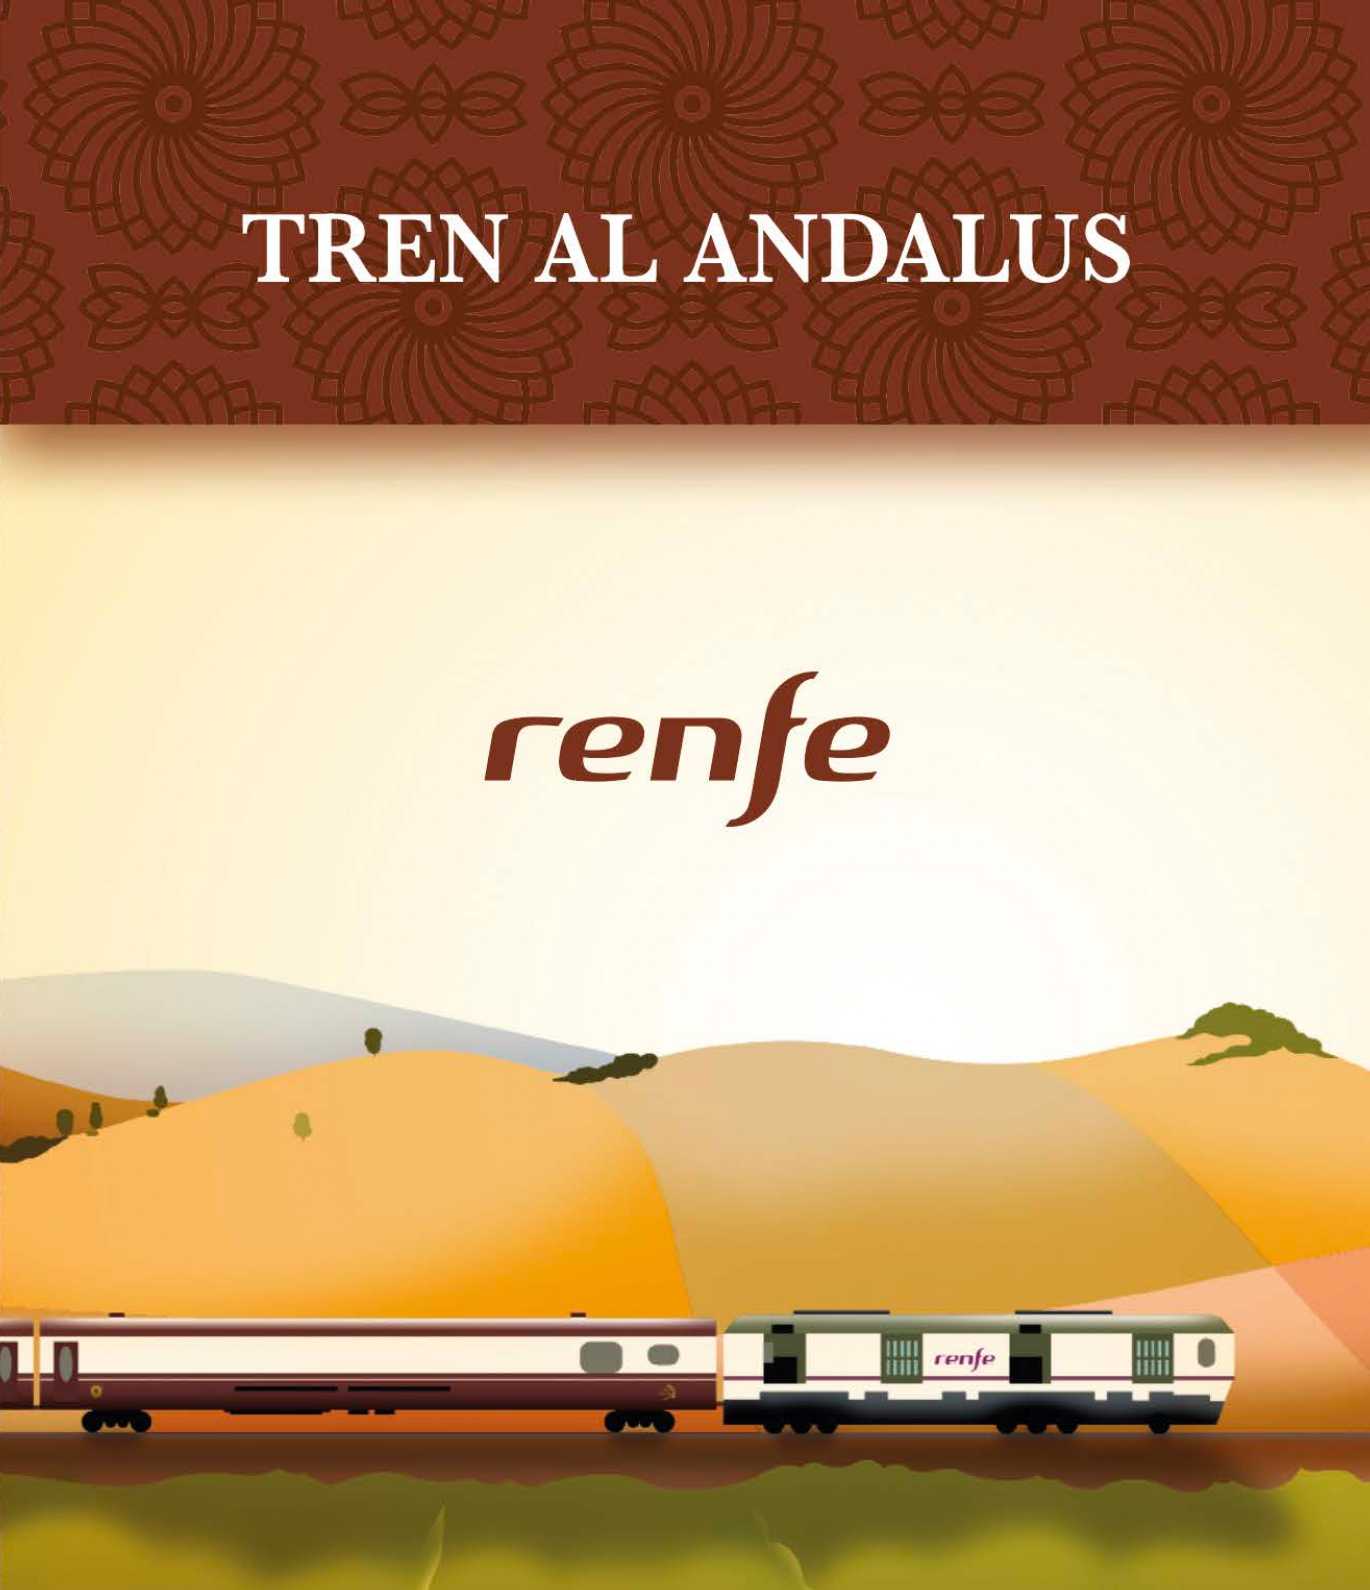 al andalus travel agency